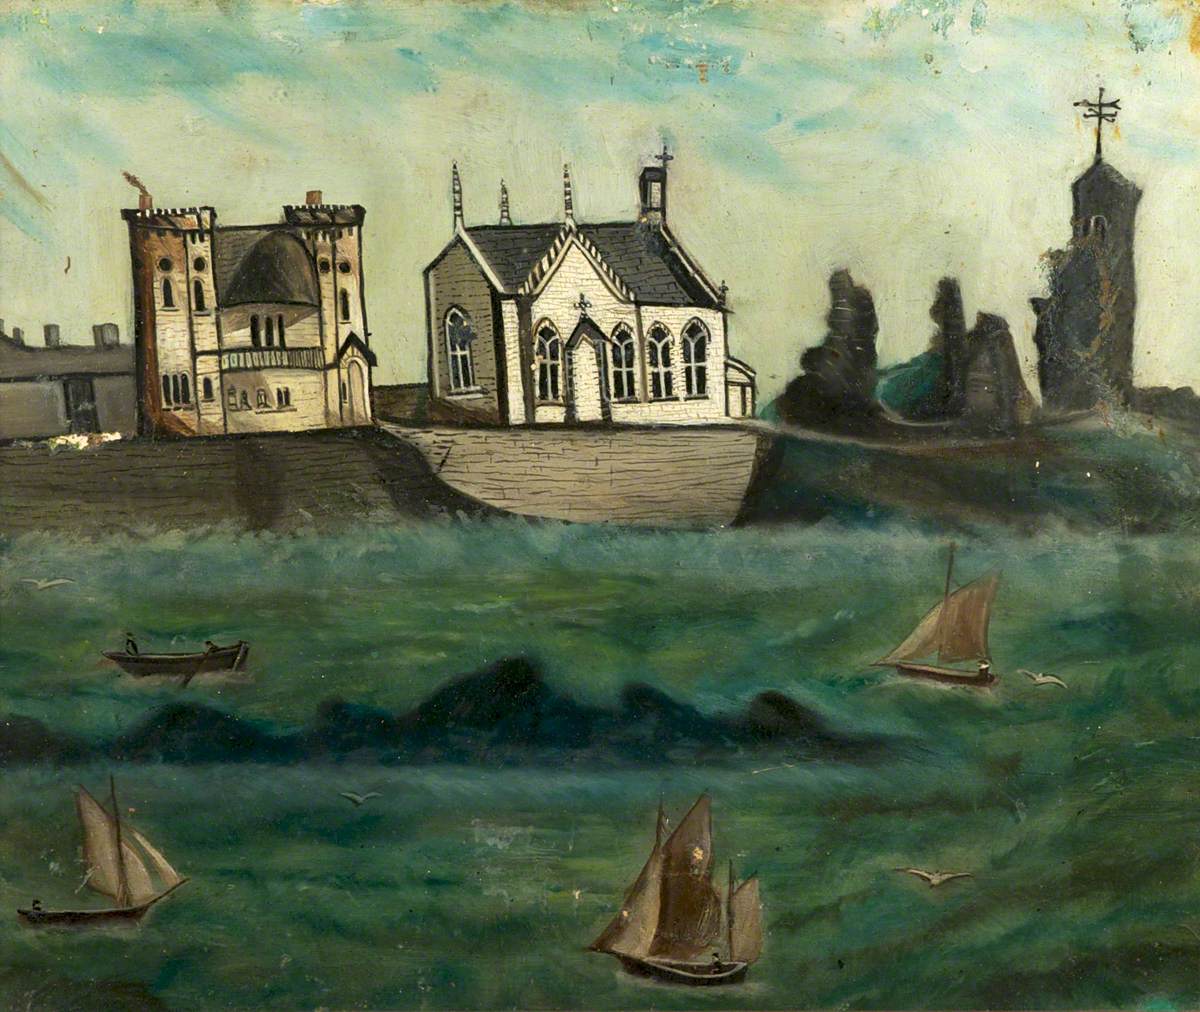 Castle House and St Michael's Church, Aberystwyth